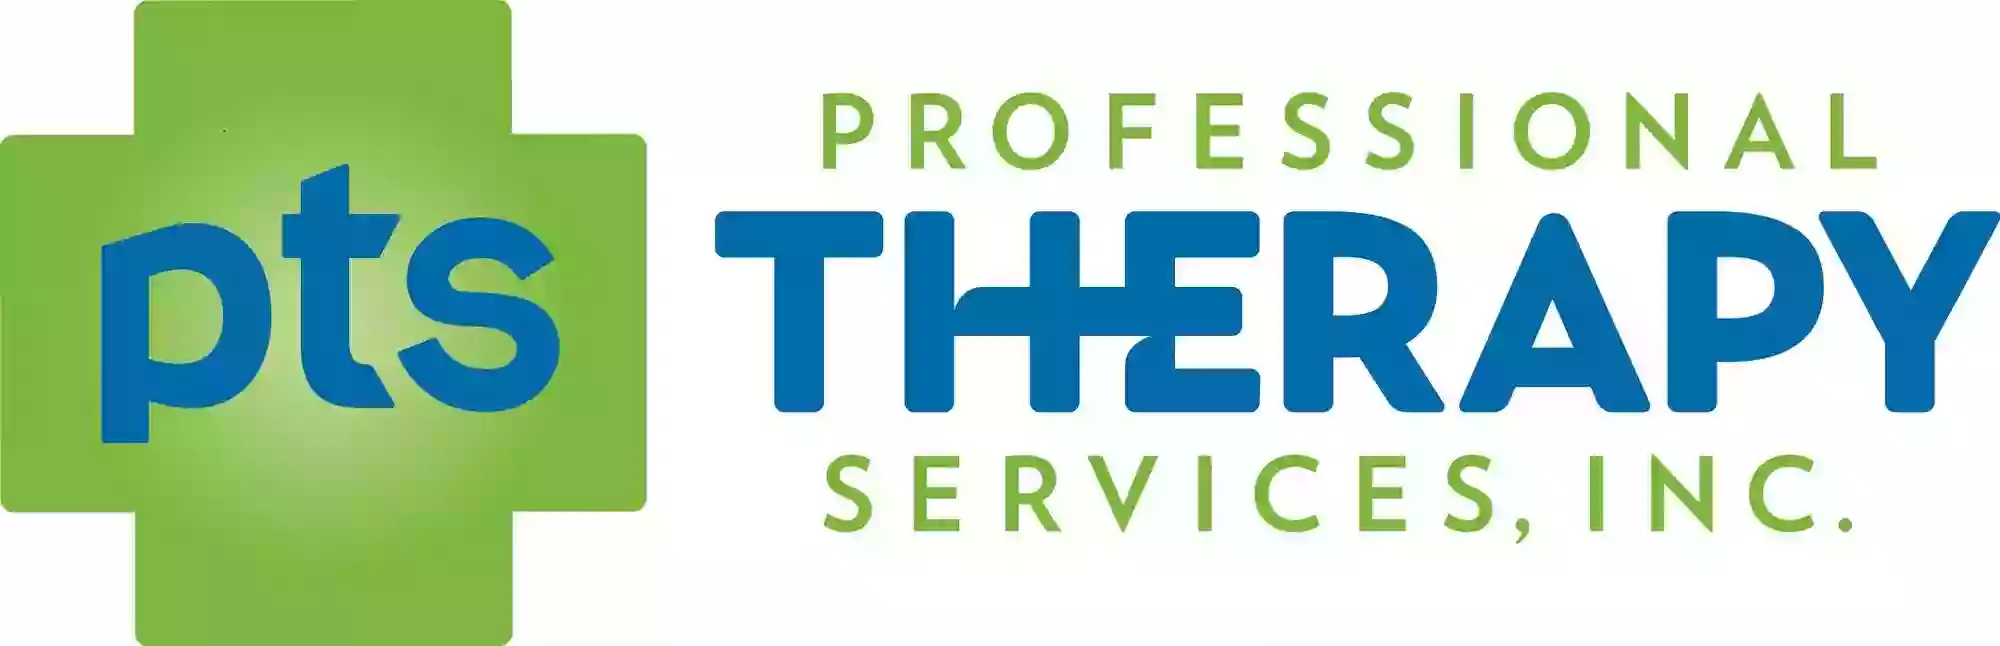 Professional Therapy Services, Inc. - St. Elizabeth's